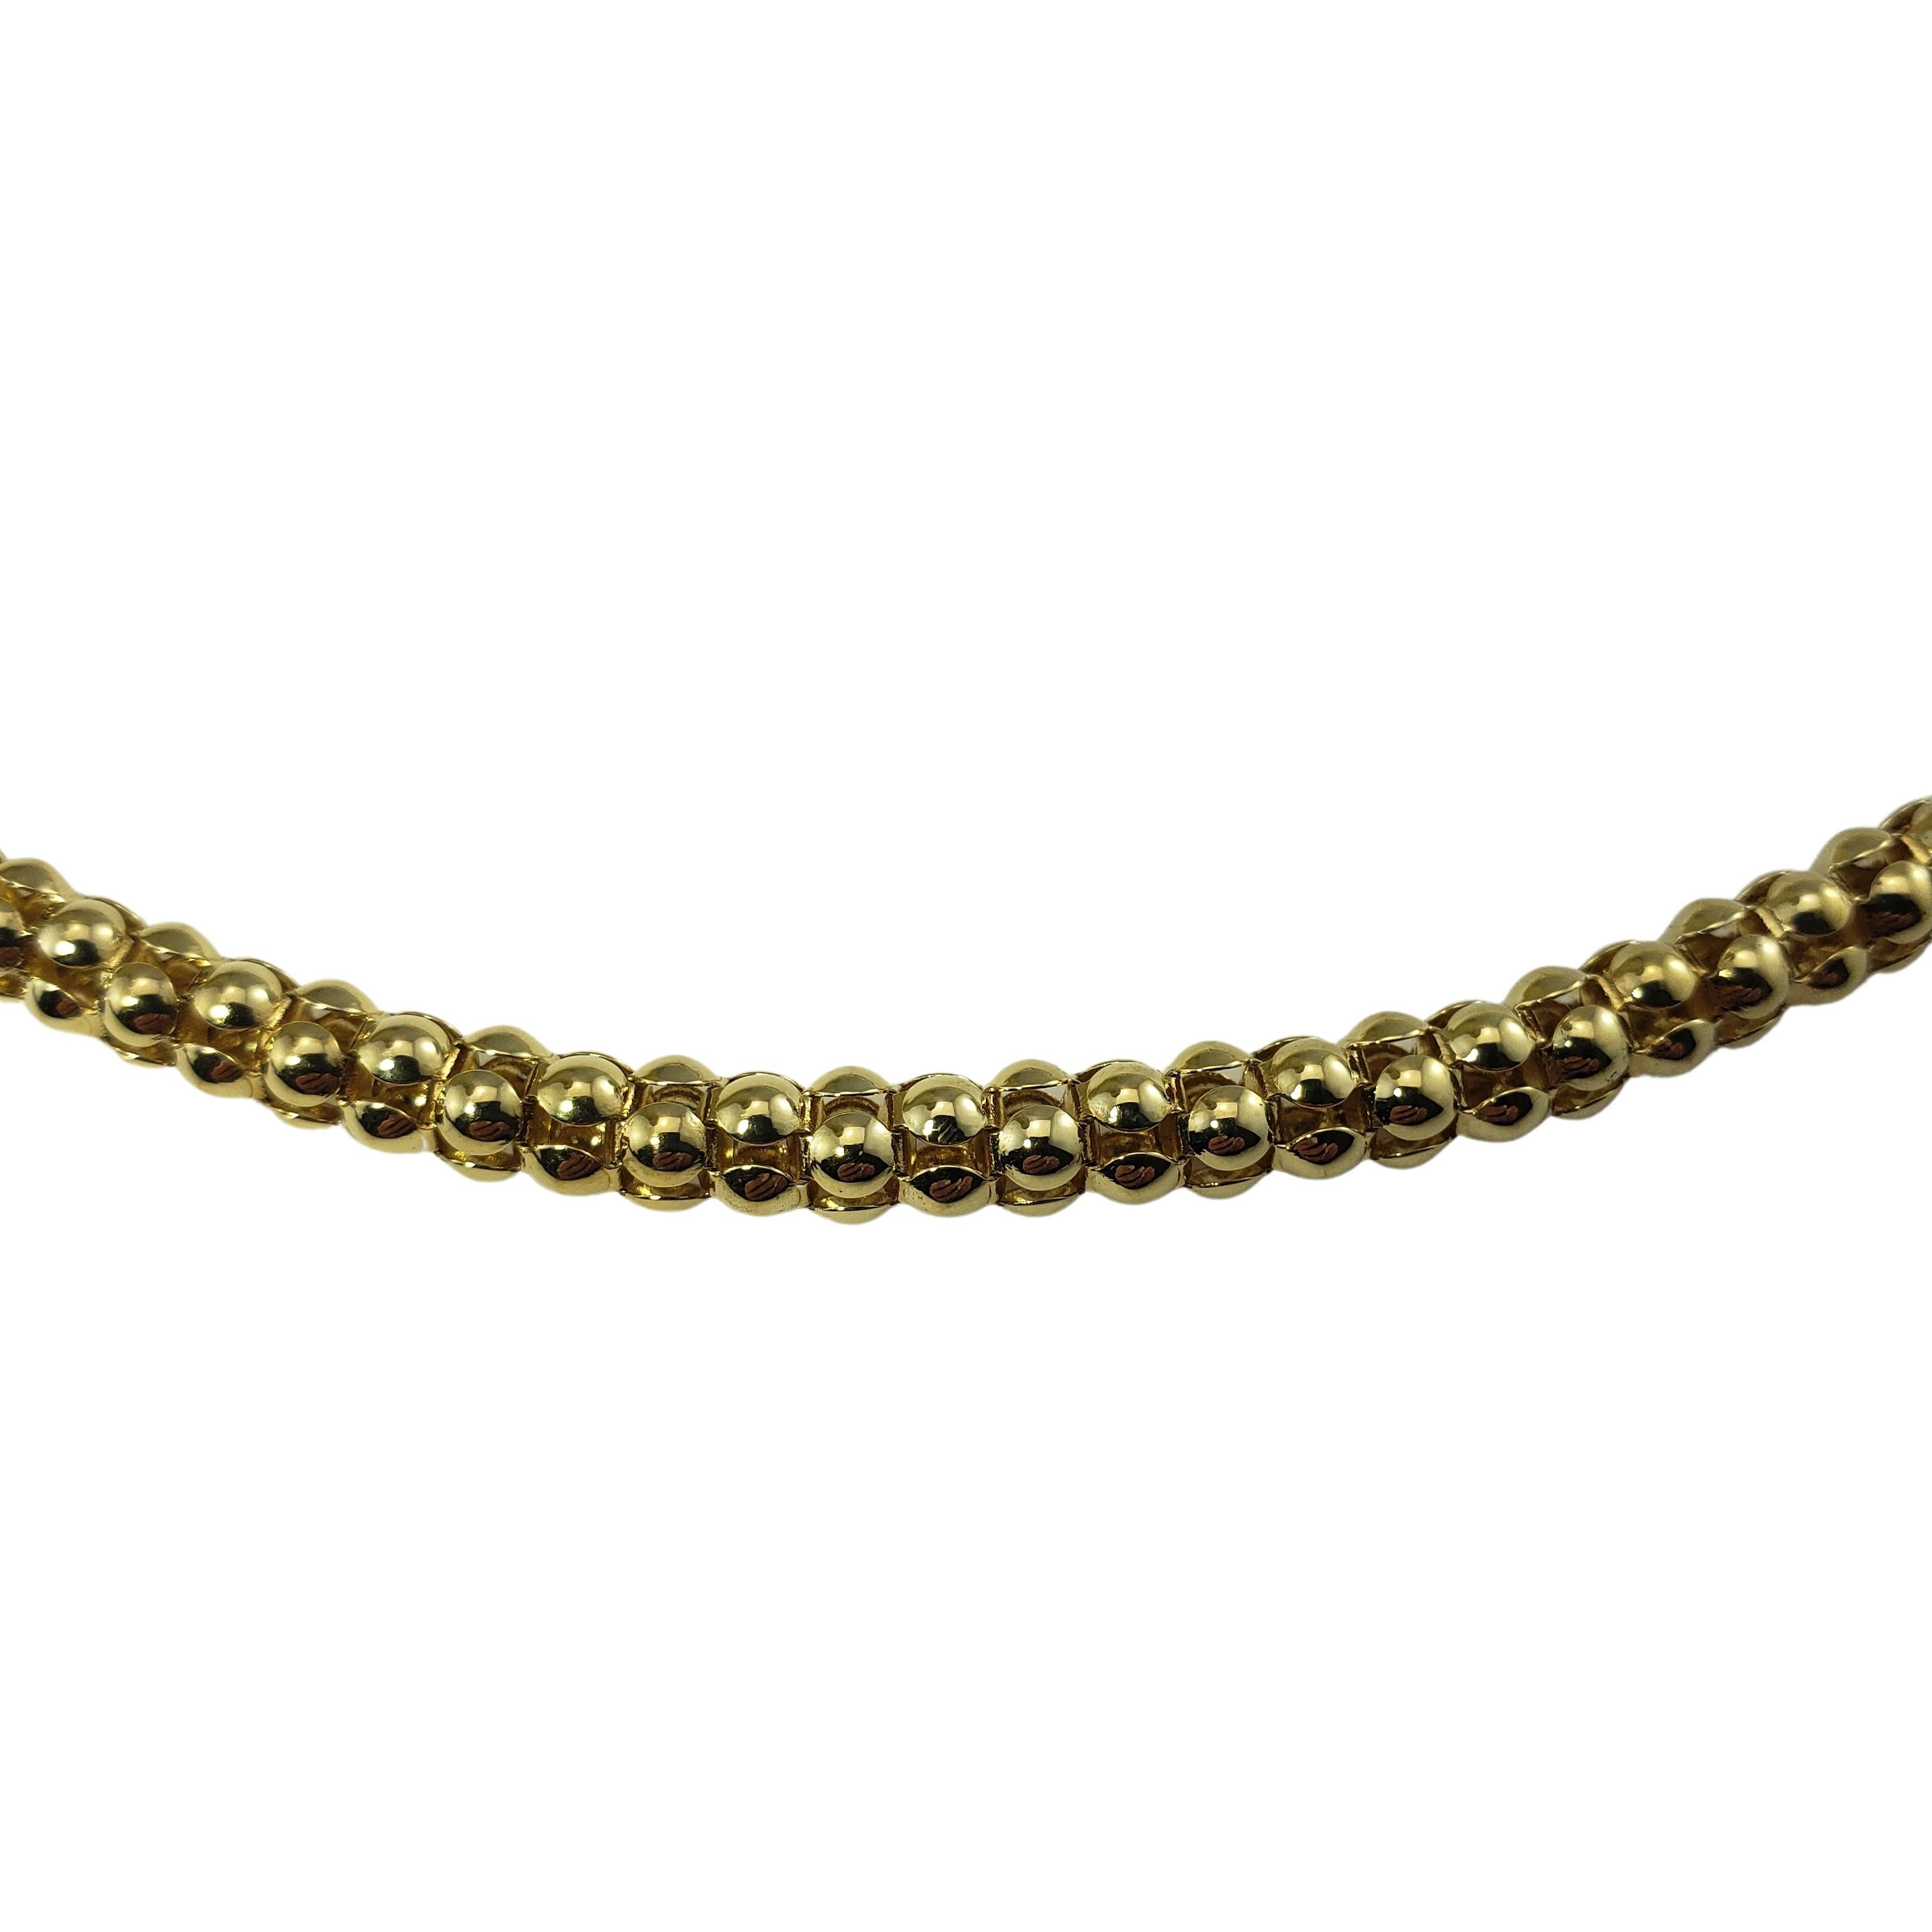 Chimento 18 Karat Yellow Gold Necklace-

This stunning necklace is crafted in beautifully detailed 18K yellow gold by Chimento.  Width:  5 mm.

Size:  17.5 inches

Weight:  14.9 dwt. /  23.2 gr.

Hallmark:  408V  MED.  DEP  750

Very good condition,